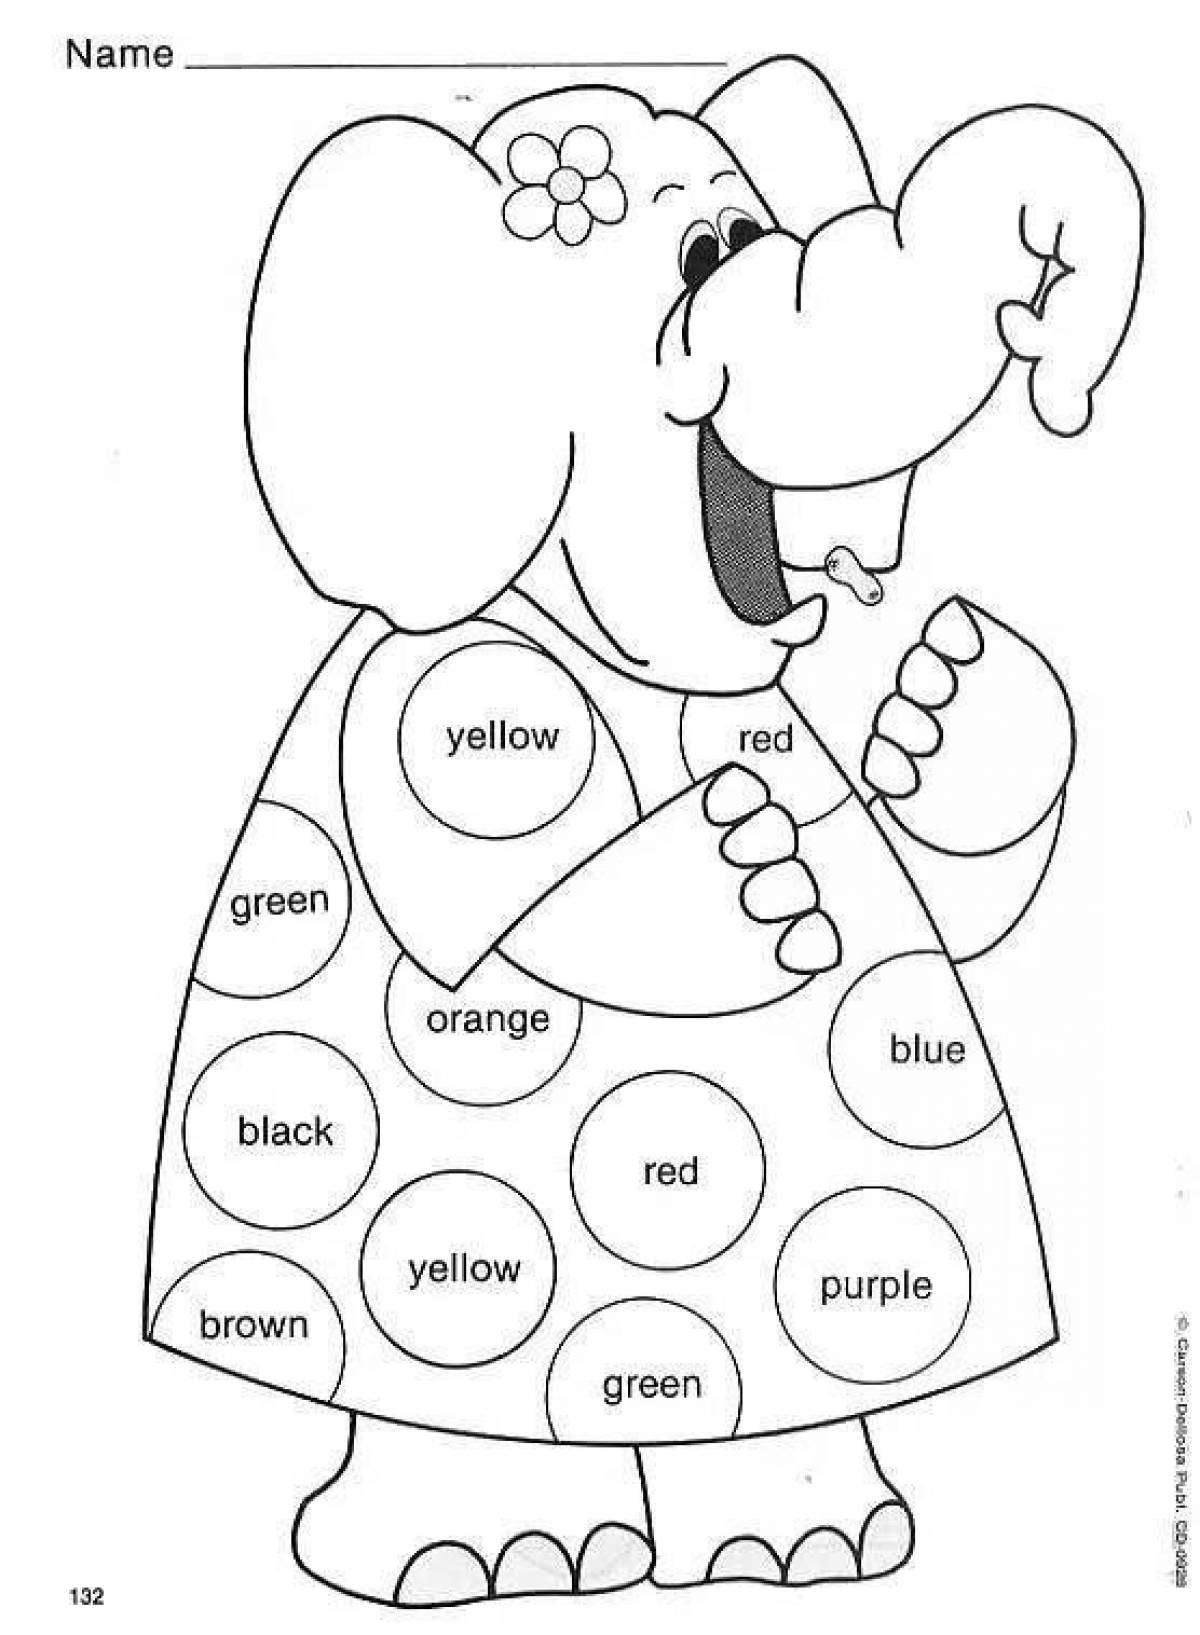 Exciting English coloring pages for kids